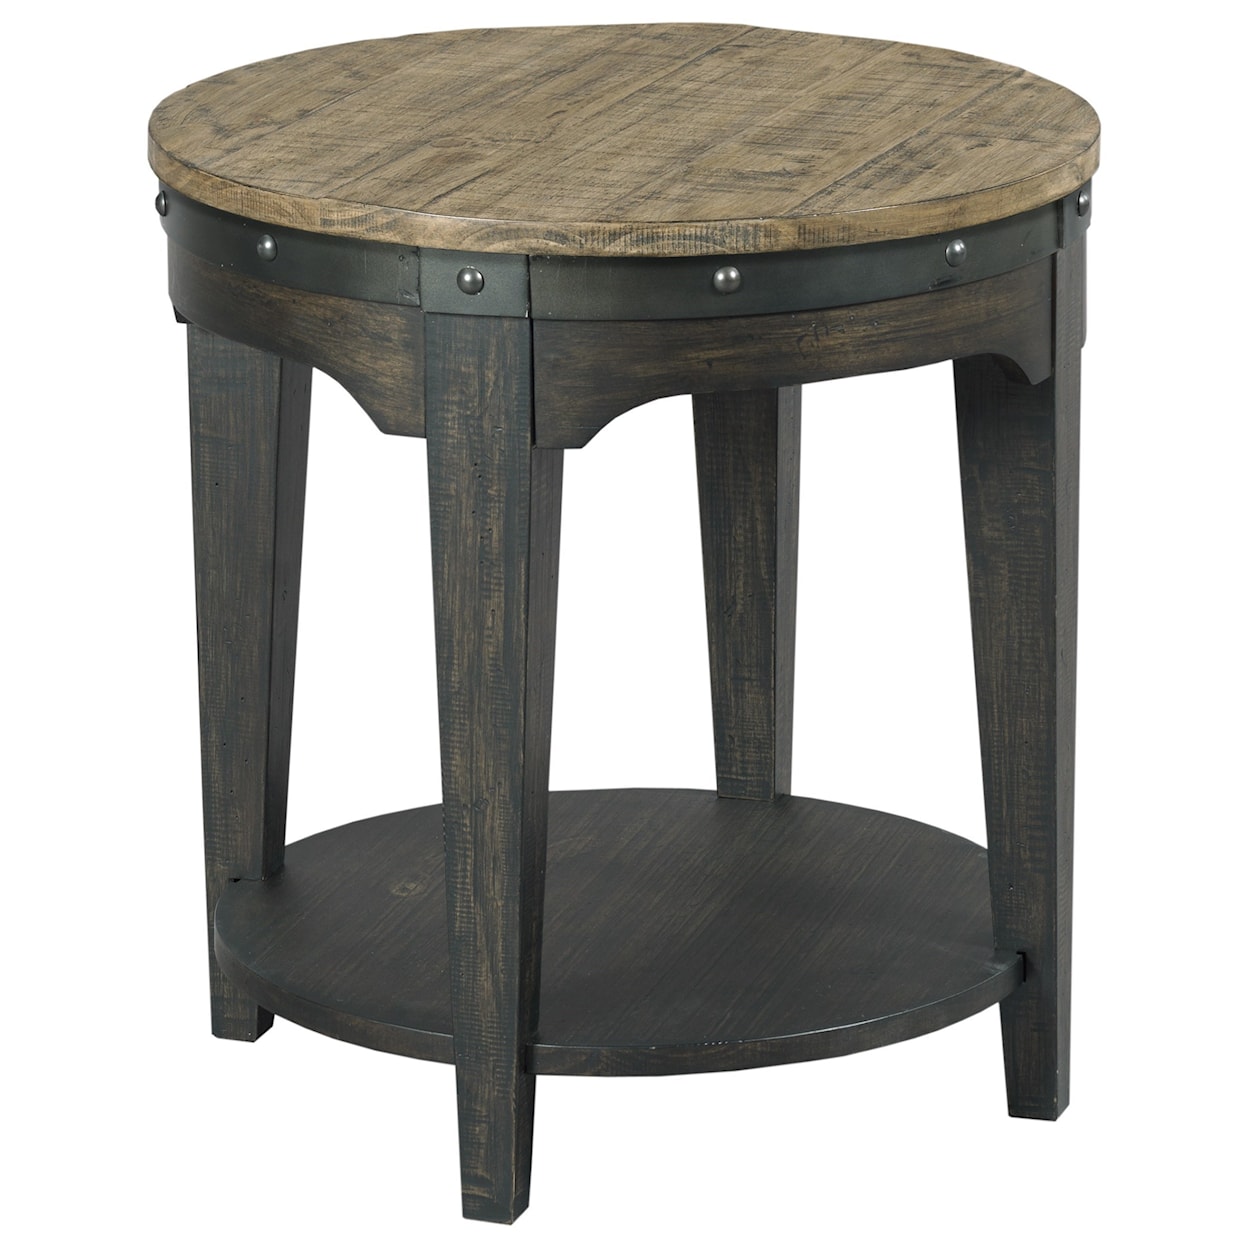 Kincaid Furniture Plank Road Artisans Round End Table                    